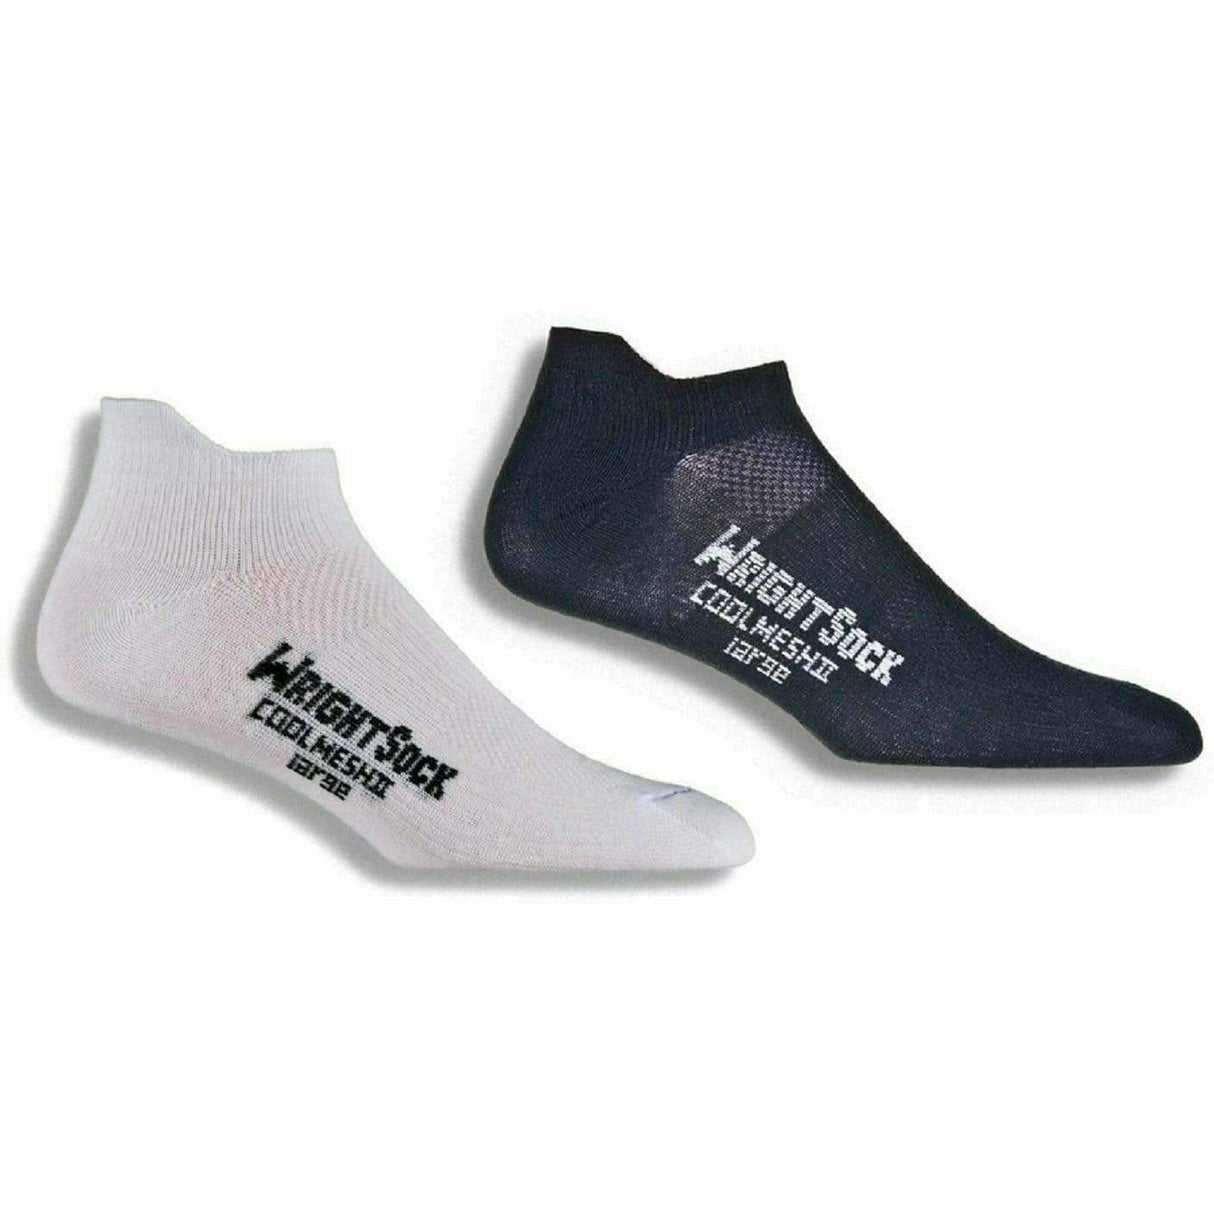 Wrightsock Double-Layer Coolmesh II Lightweight Tab Socks  -  Small / Black/White / 2-Pair Pack